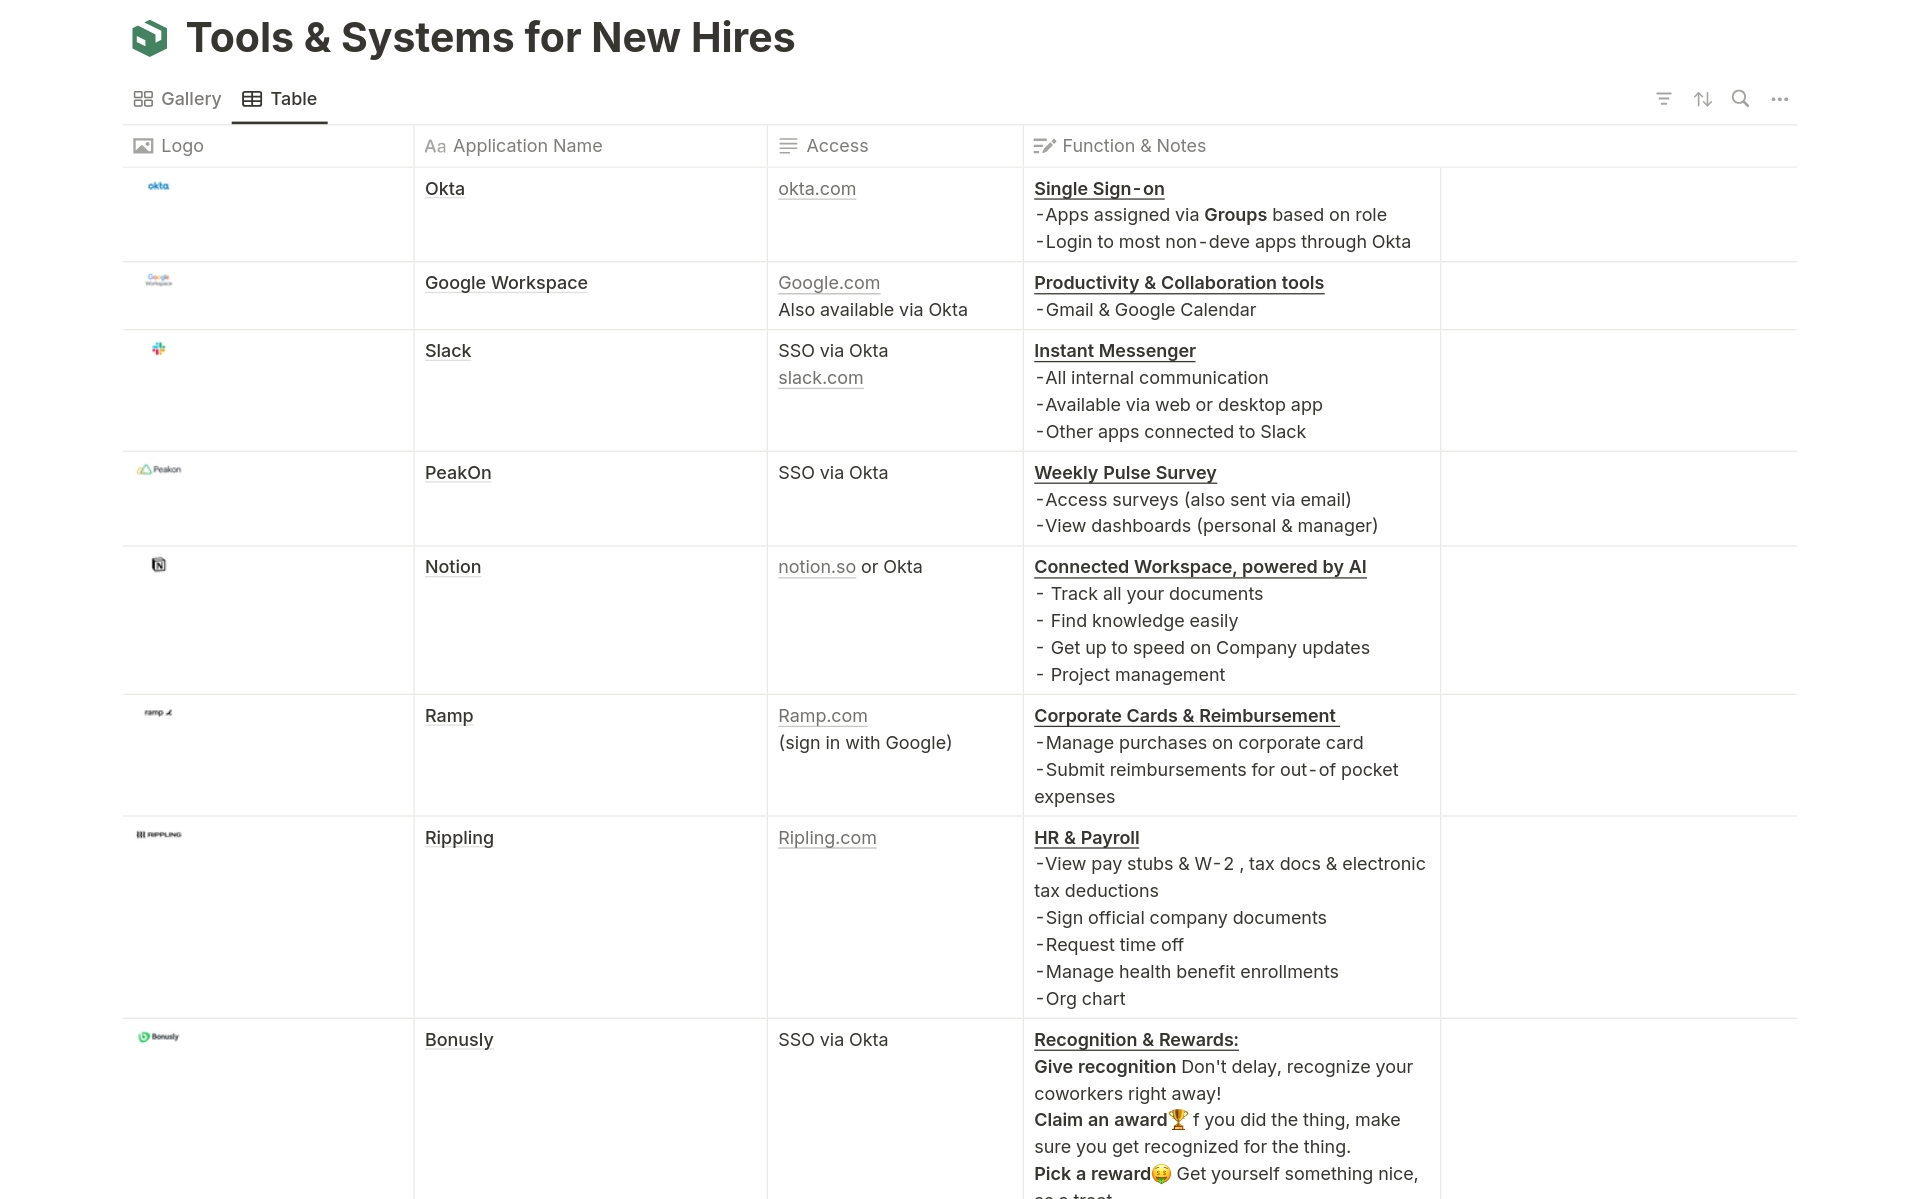 Kickstart new hires with a comprehensive toolkit of essential systems and setup guides to ensure swift productivity and seamless onboarding.